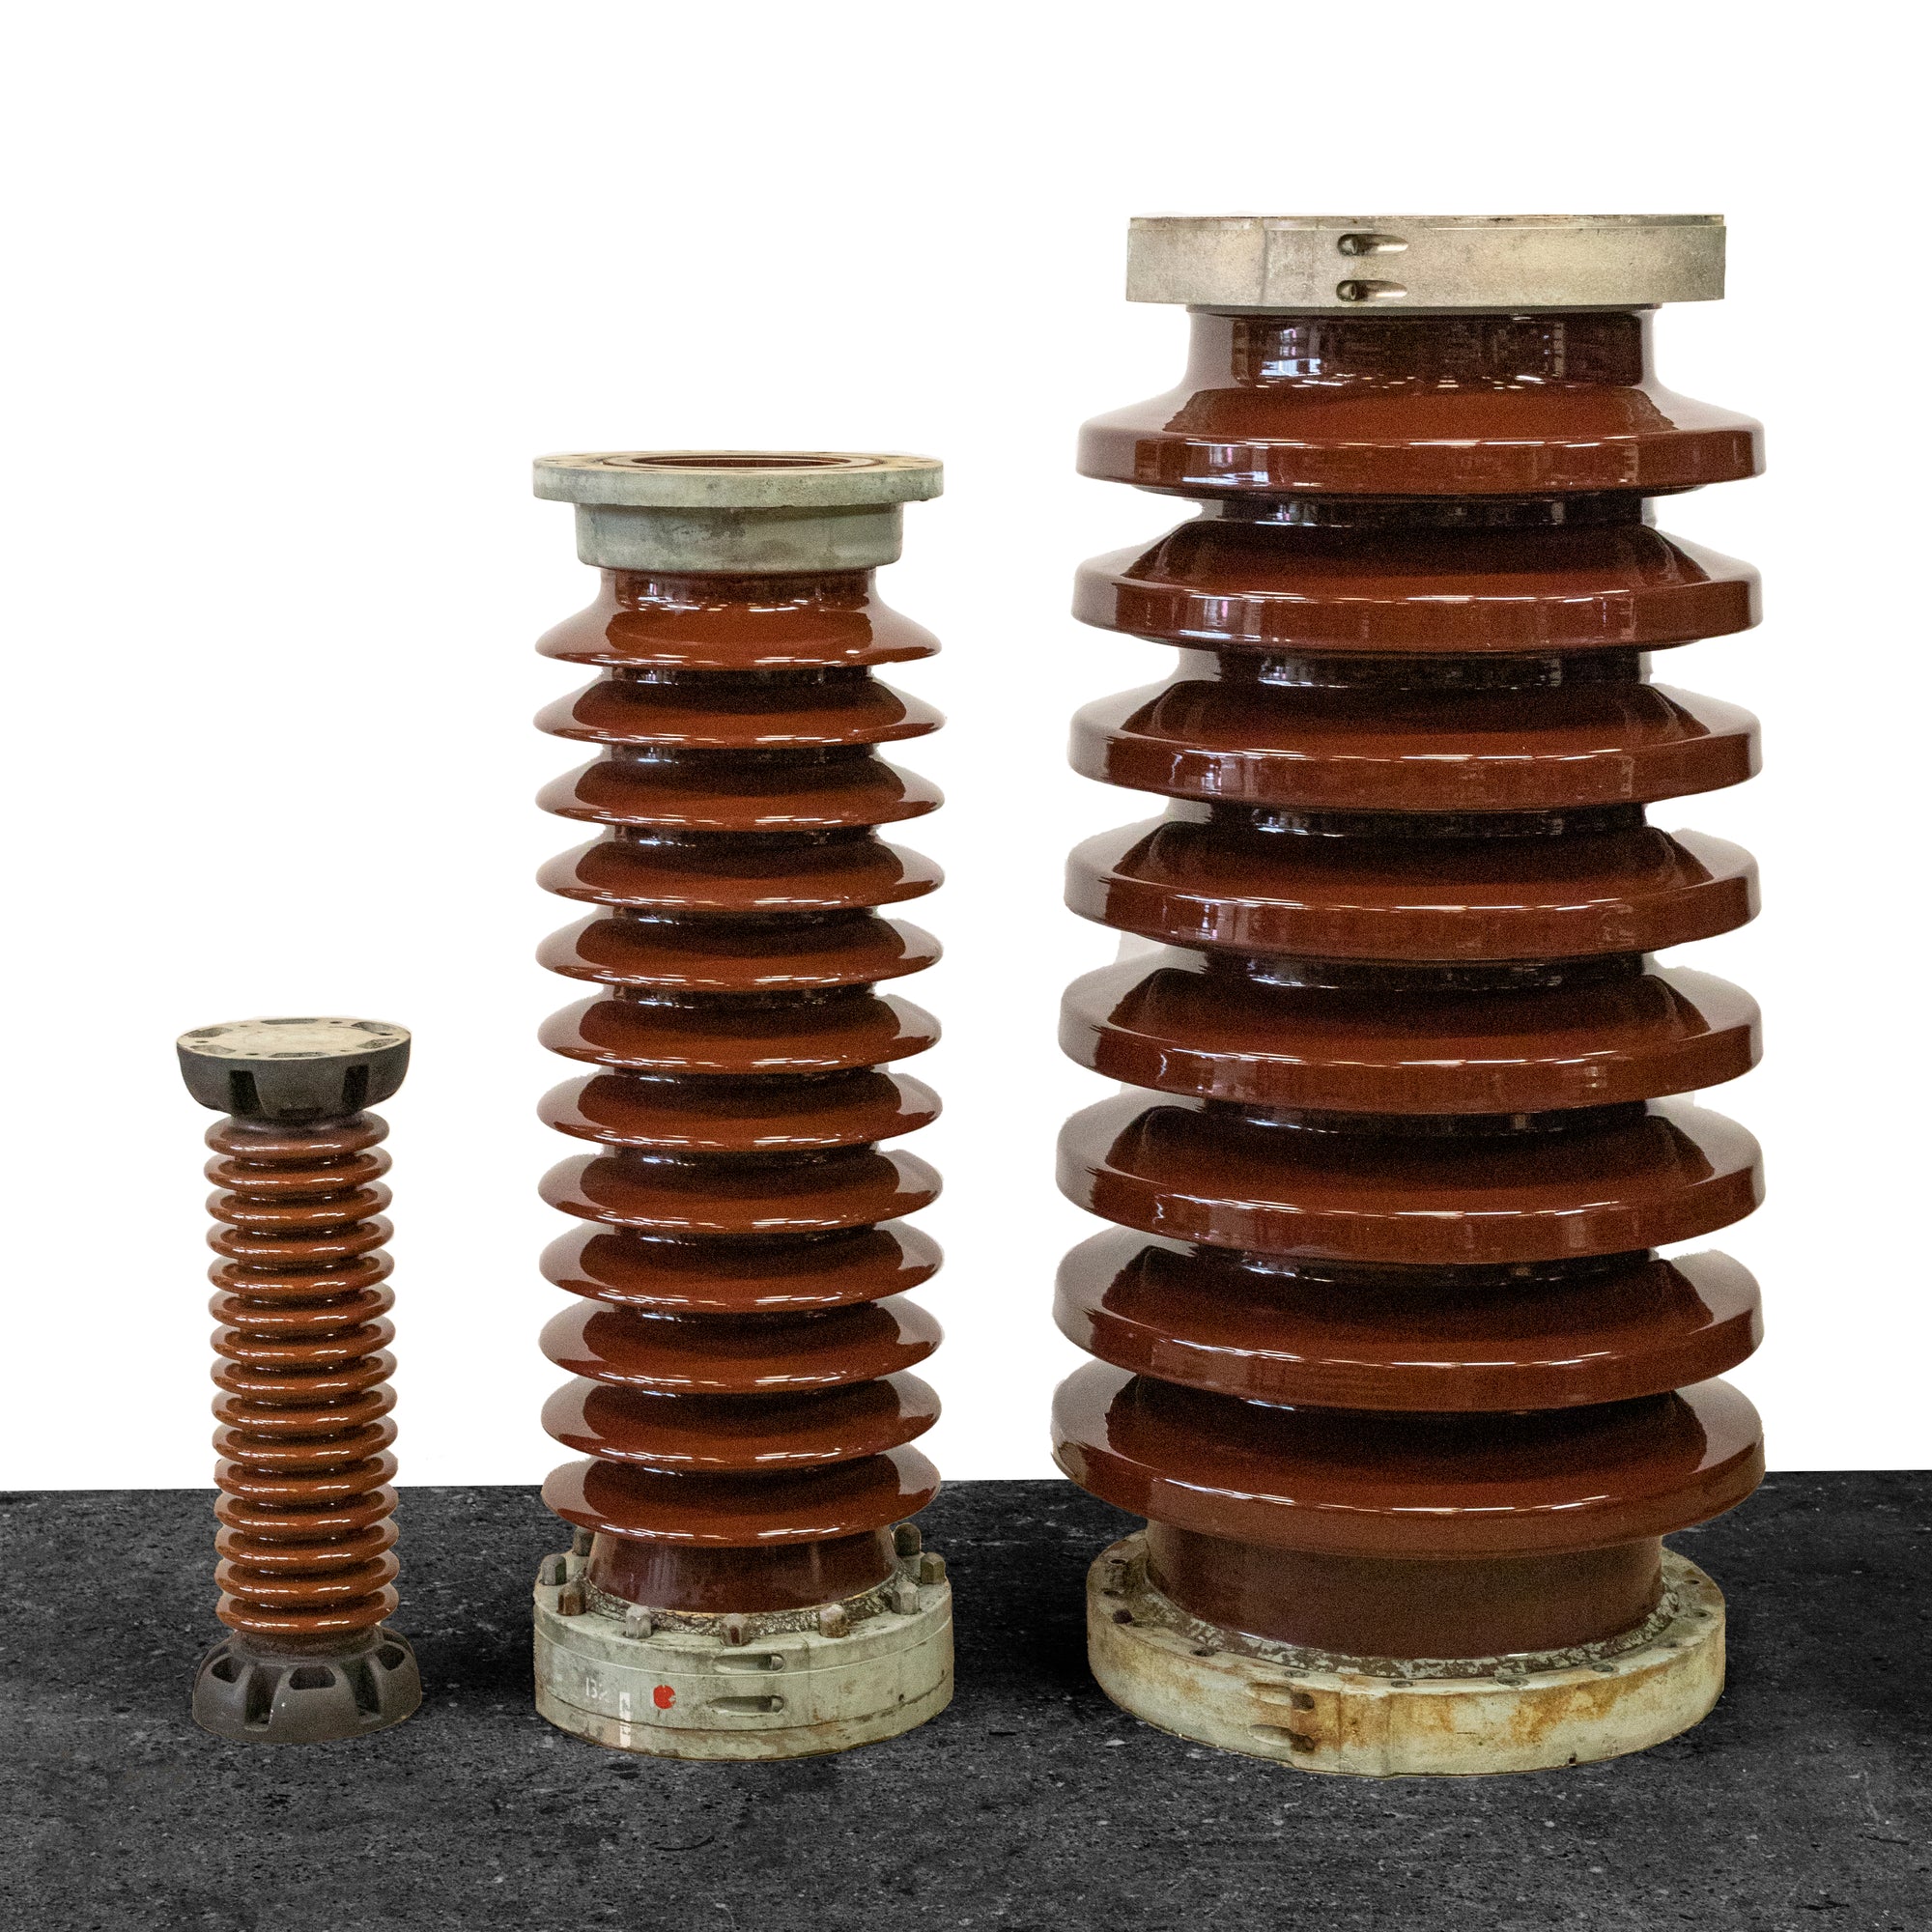 Industrial Ceramic Electrical Insulator Coils | The Architectural Forum